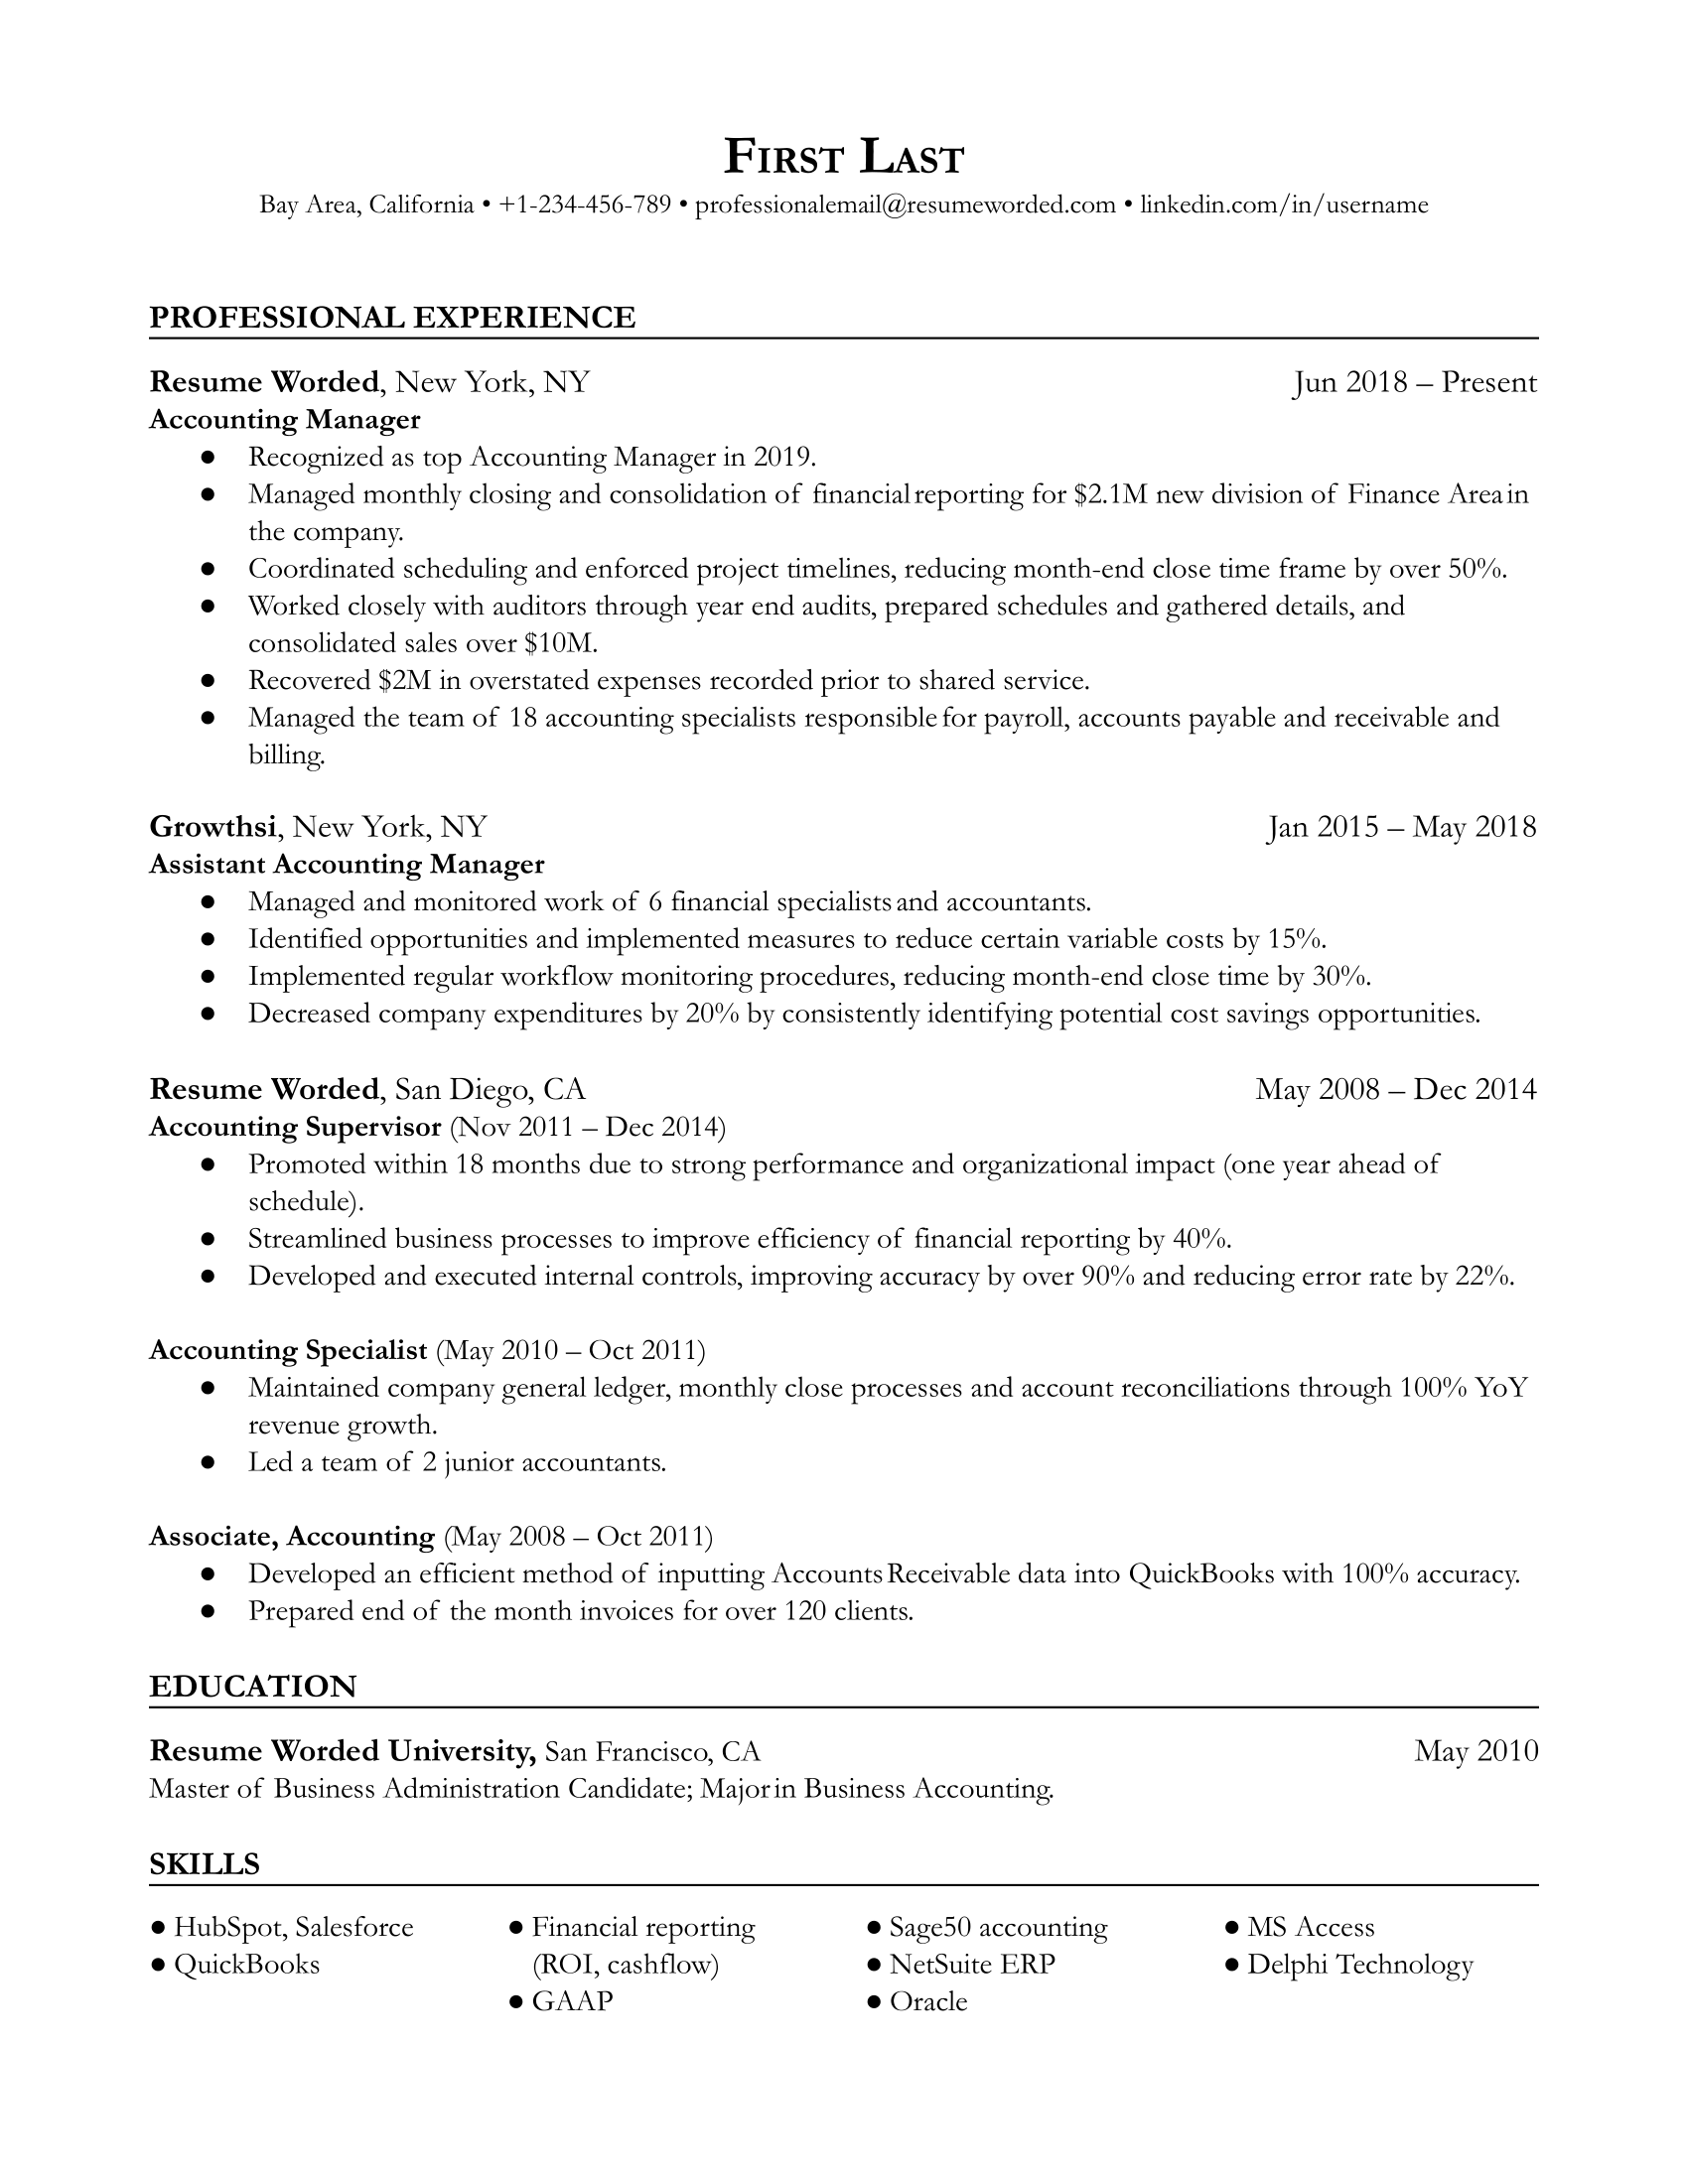 Accounting manager resume with promotions and measurable achievements